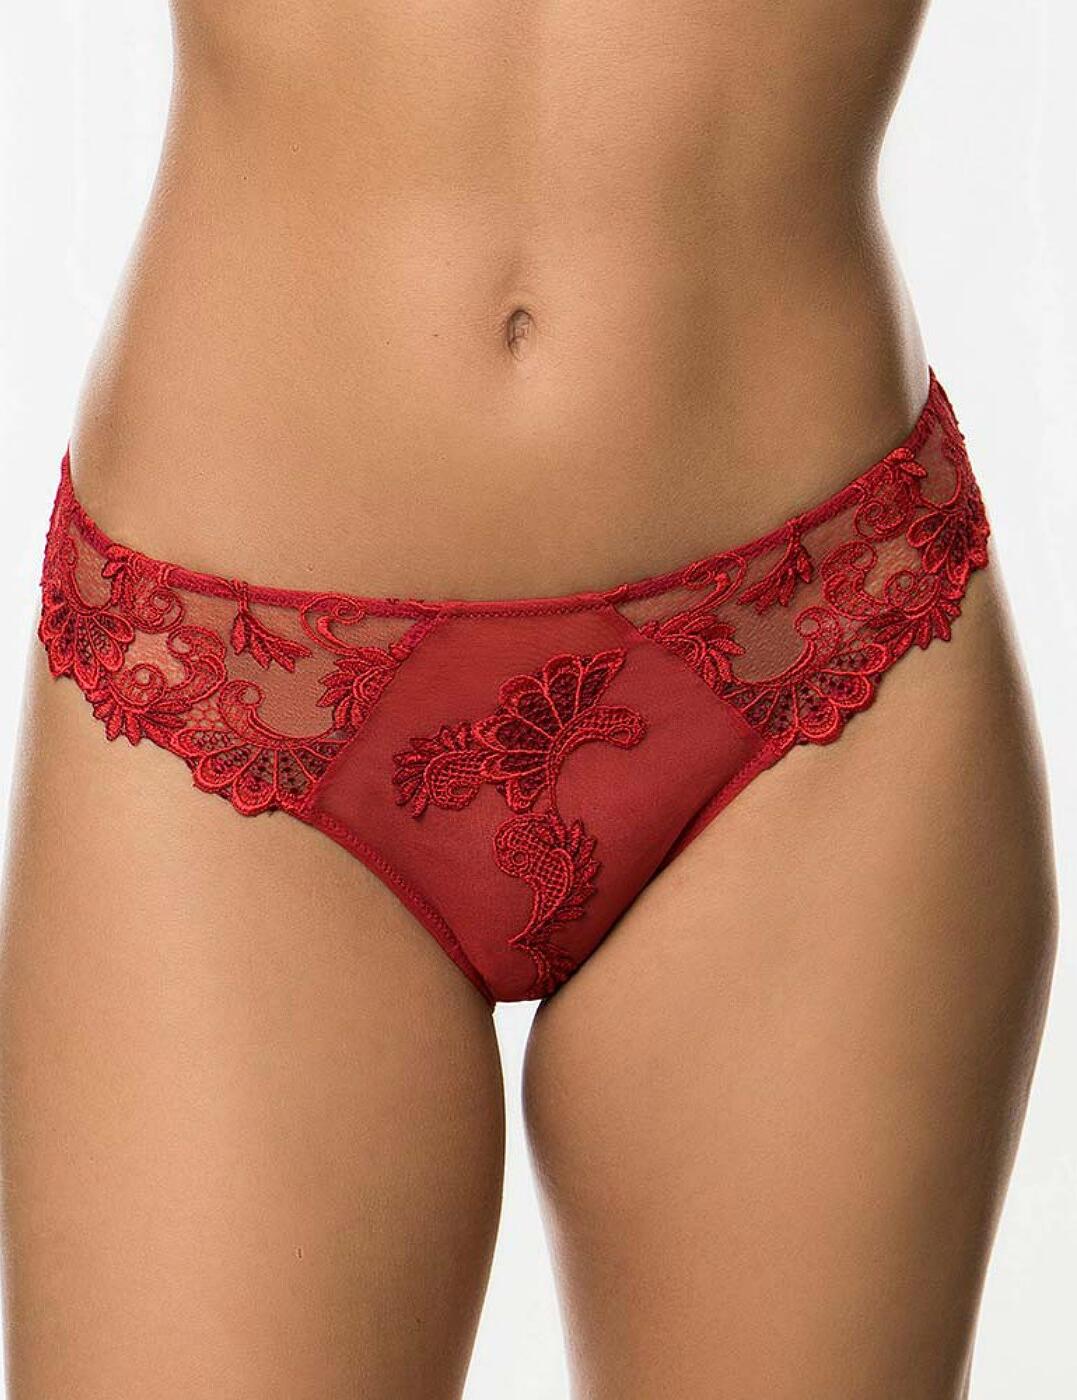 Lise Charmel Dressing Floral Thong - An Intimate Affaire